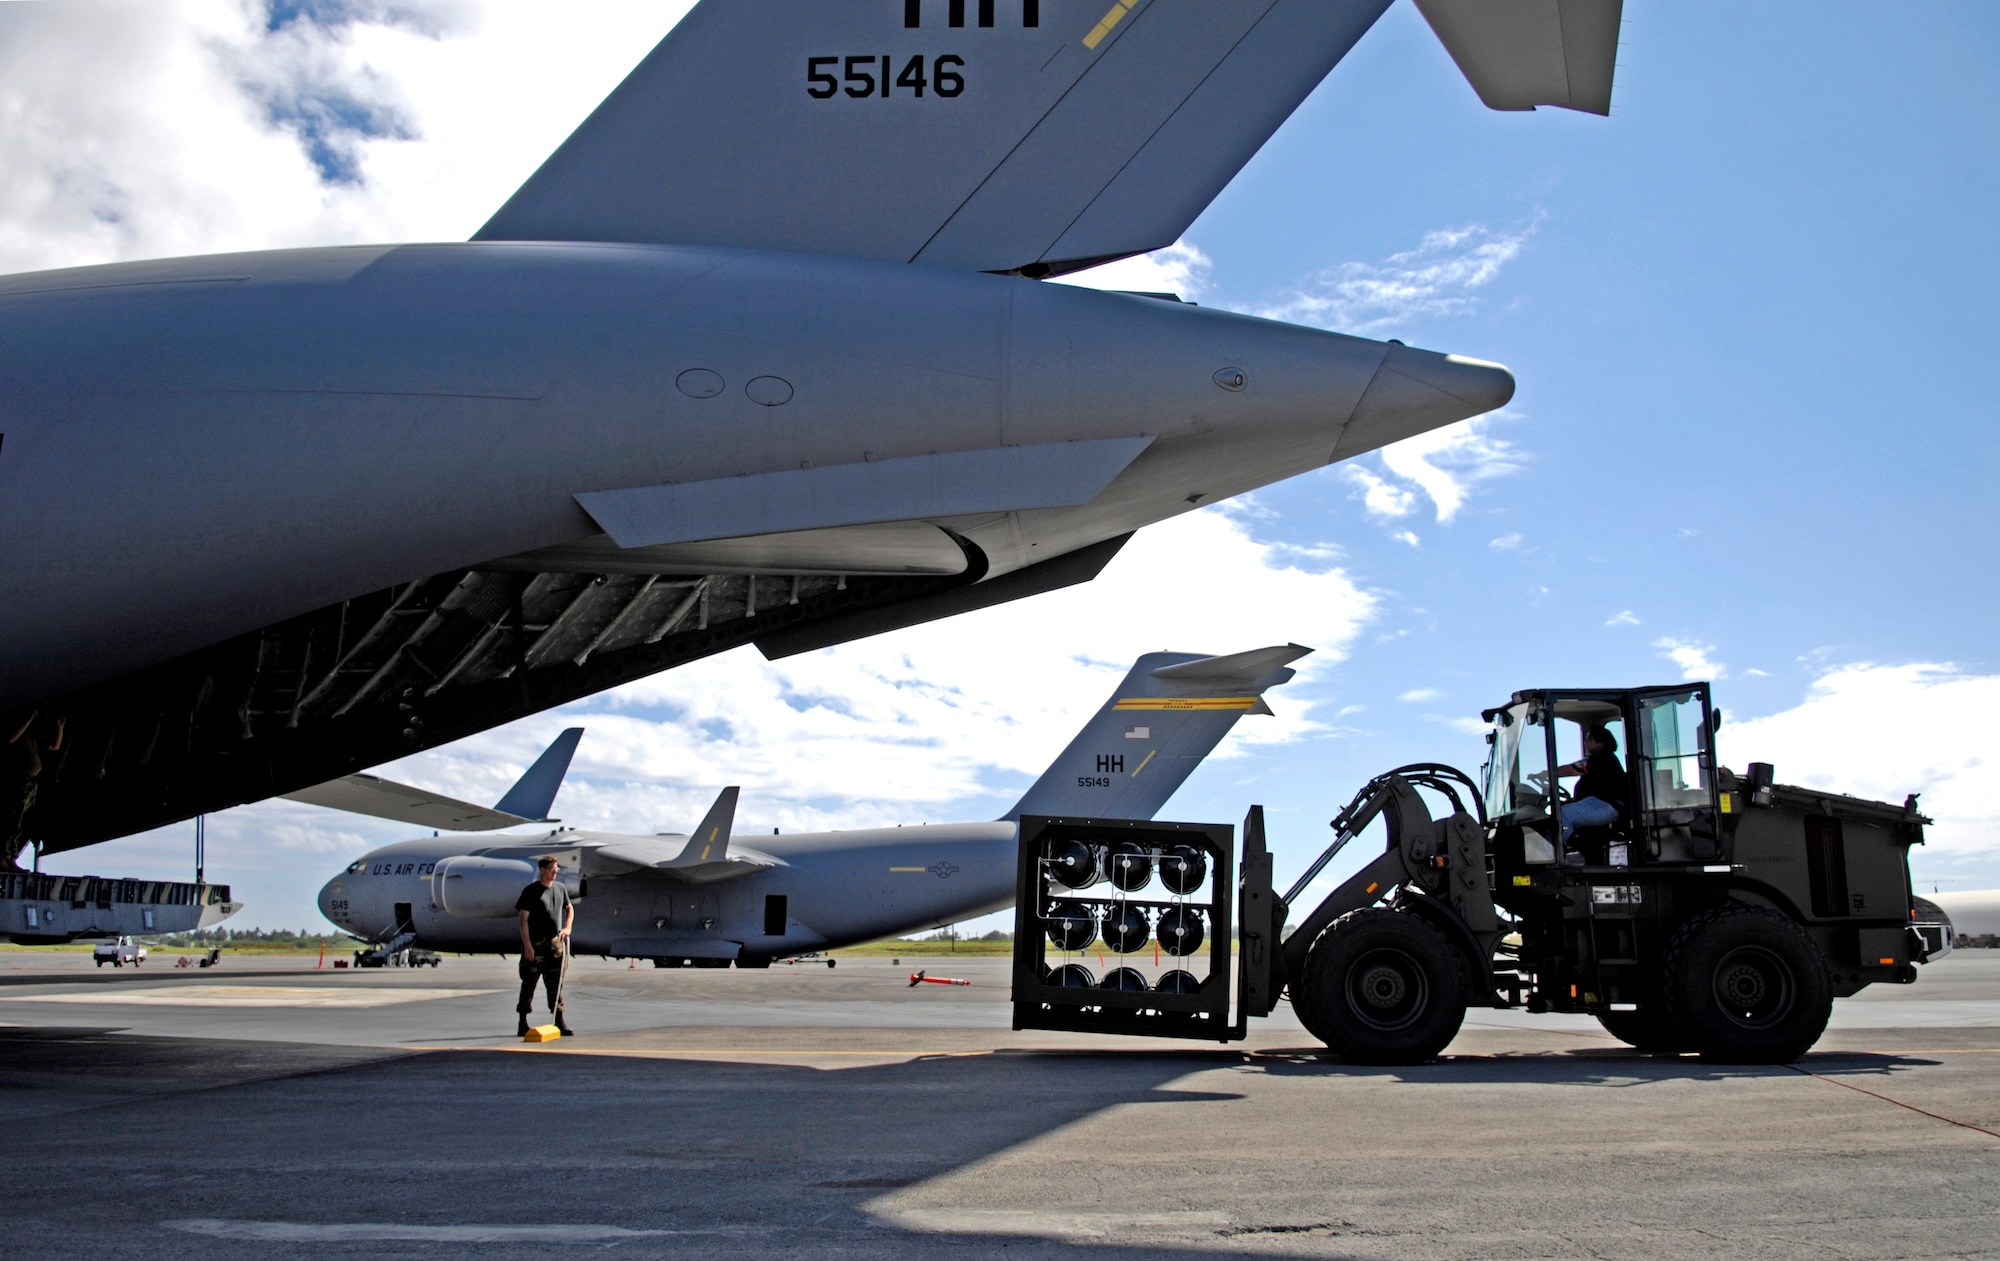 The HydraFLX System is brought up to the back end of a C-17 Globemaster III to demonstrate its mobile capability at Hickam Air Force Base, Hawaii Oct. 18, 2006. The HydraFLX System is being tested by the Air Force as an alternate energy source. It will generate ultra-pure H2 (hydrogen) from water in a flexible pressure management process for fueling buses, tow-tractors, vans, sedans and ground support equipment. The system can also be deployed anywhere and operate in hostile theaters without infrastructure or pipelines. (U.S. Air Force photo/Tech. Sgt. Shane A. Cuomo)
